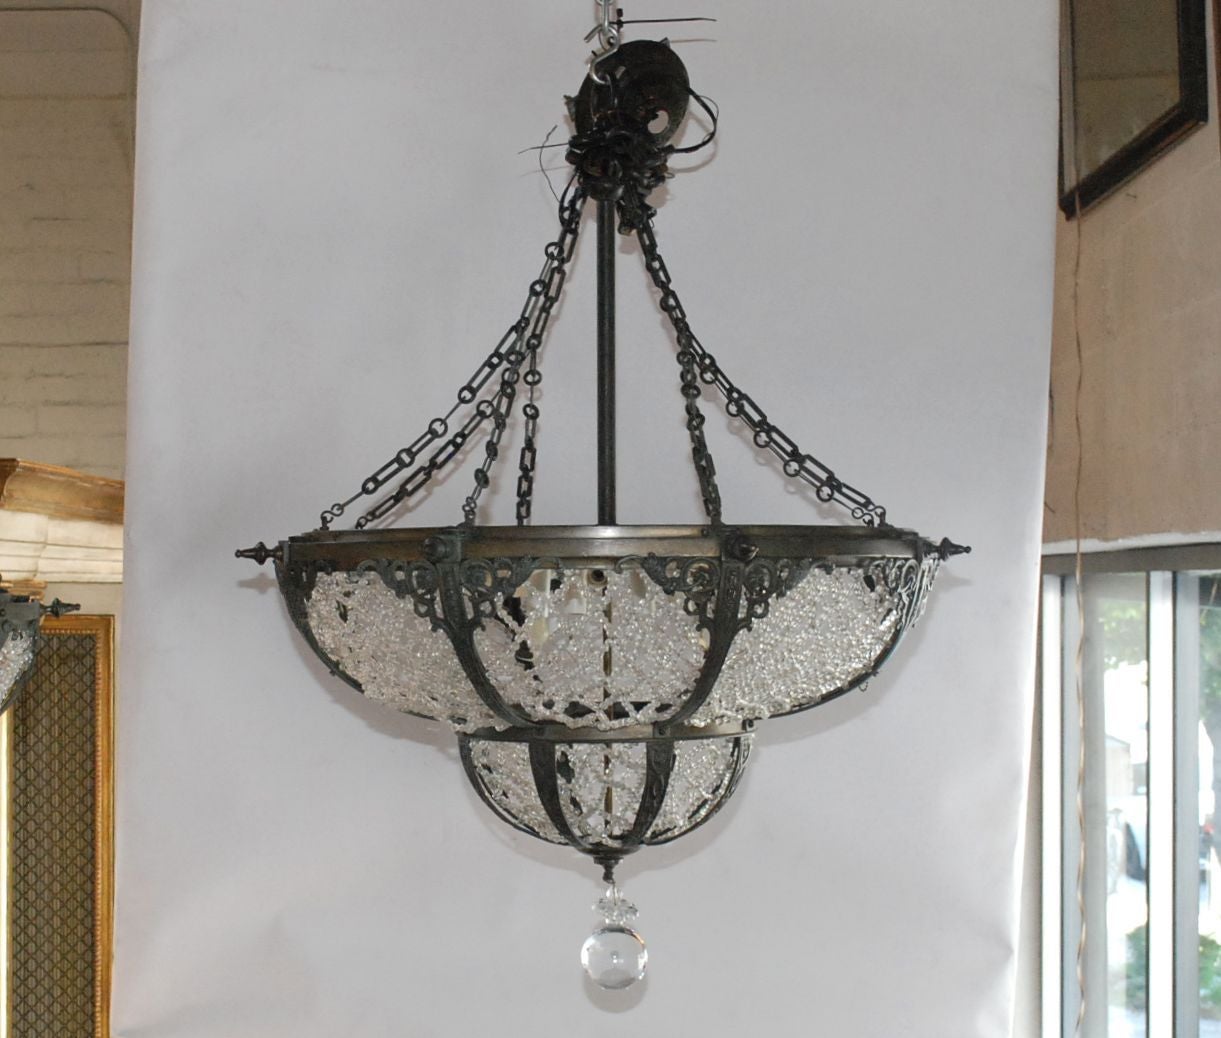 A pair of bronze and beaded glass chandeliers in the Russian style. Each chandelier has 12 bulb sockets. Bronze is decorated with raised foliate design. Glass beads are arranged in a diagonal crisscross pattern.